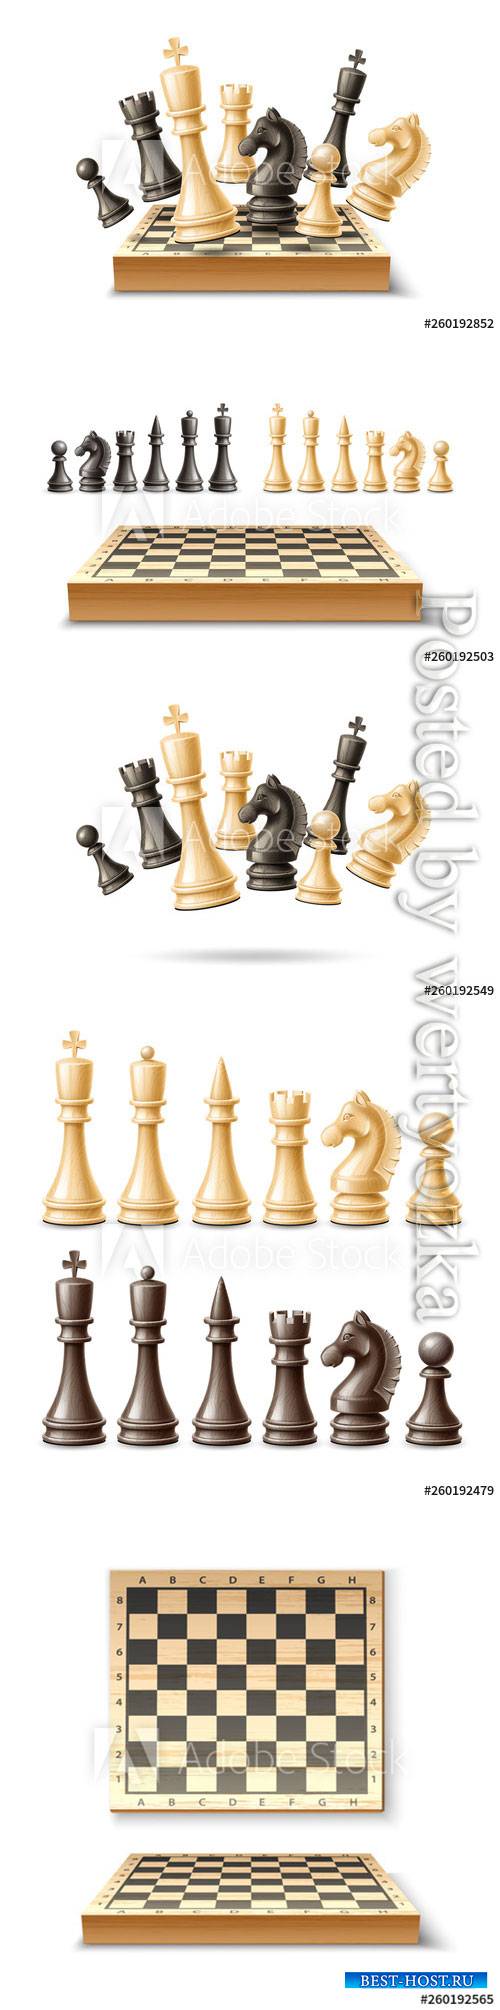 Realistic chess pieces and chessboard set vector illustrations